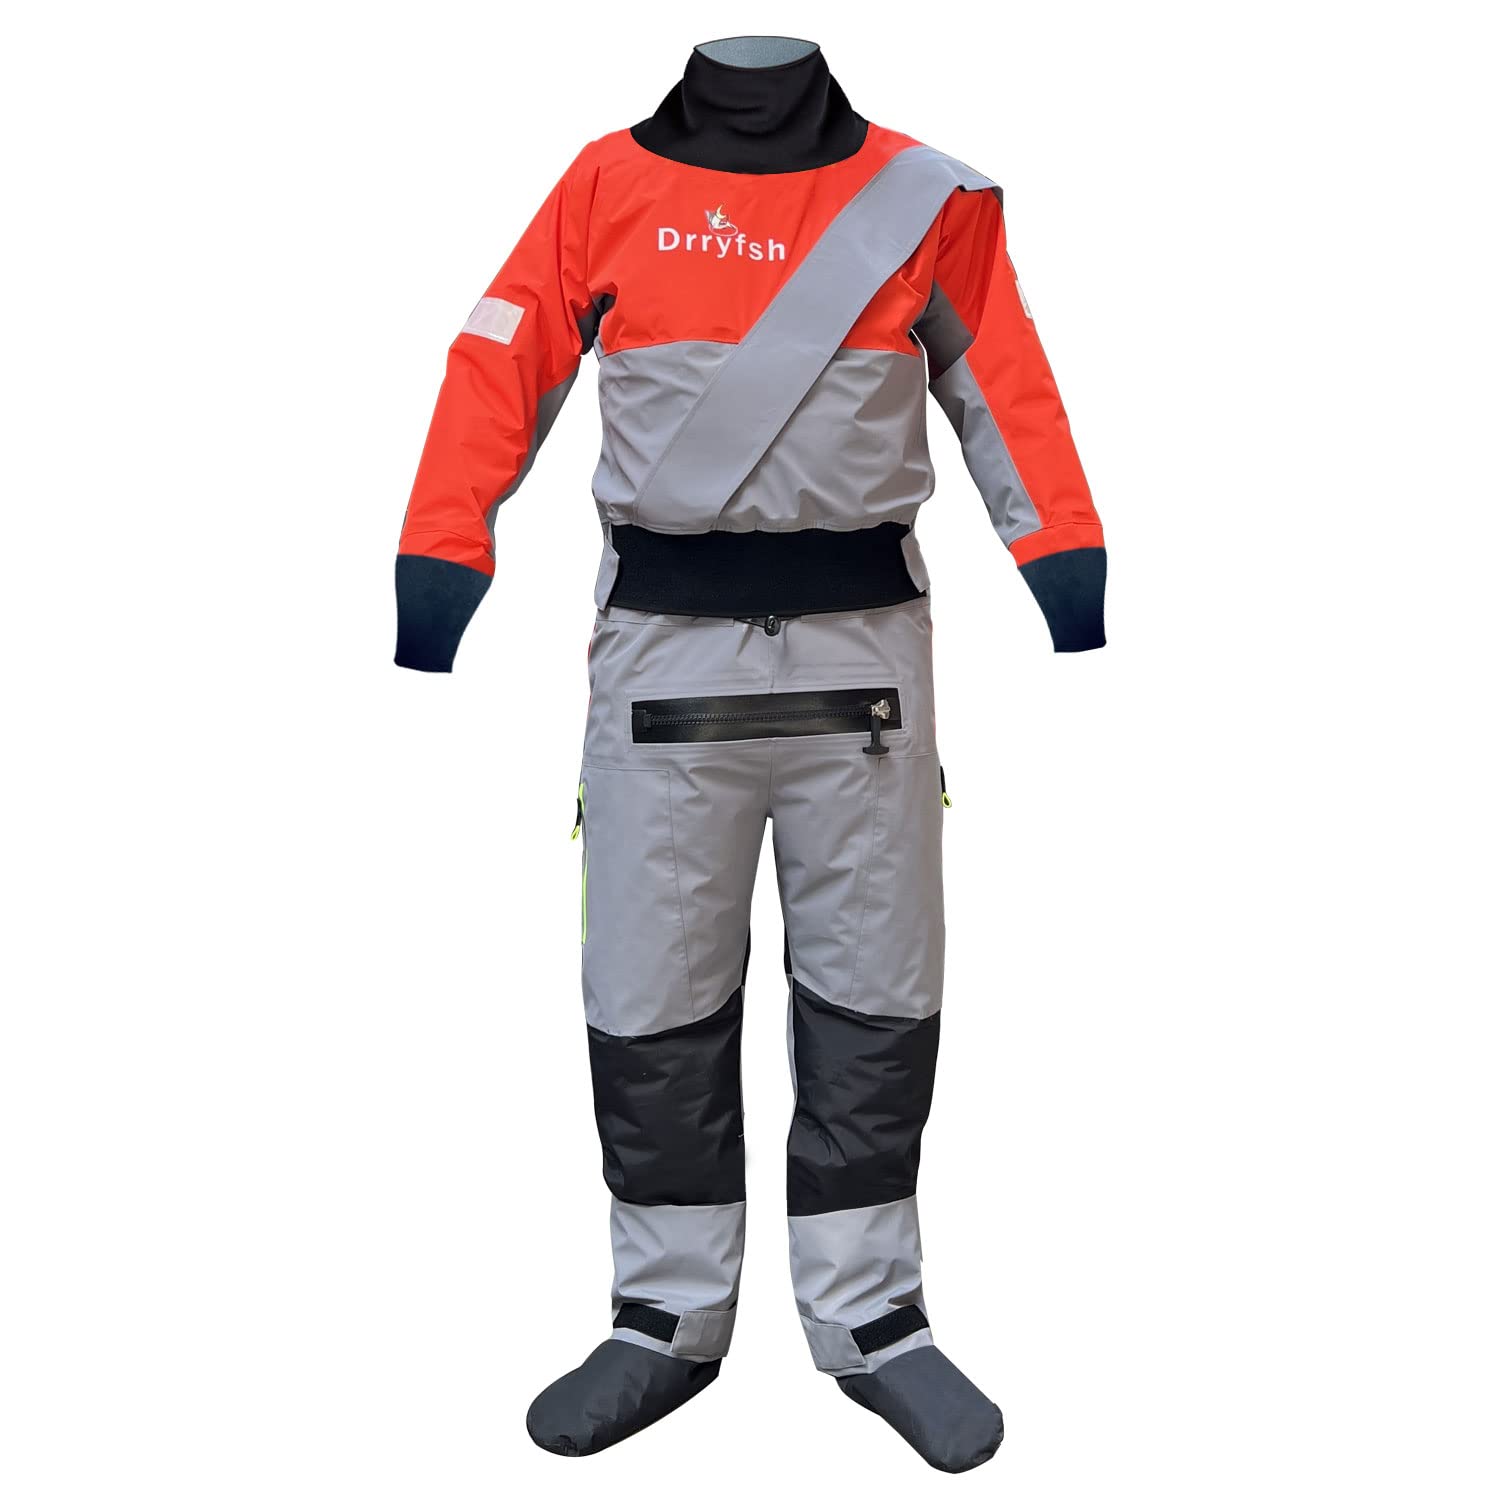 Mens Semi-Dry Suits with Neoprene Gaskets for Fishing Sailing PaddlingBoatingCrafting or ATV Sport in Cold Weather Neopren